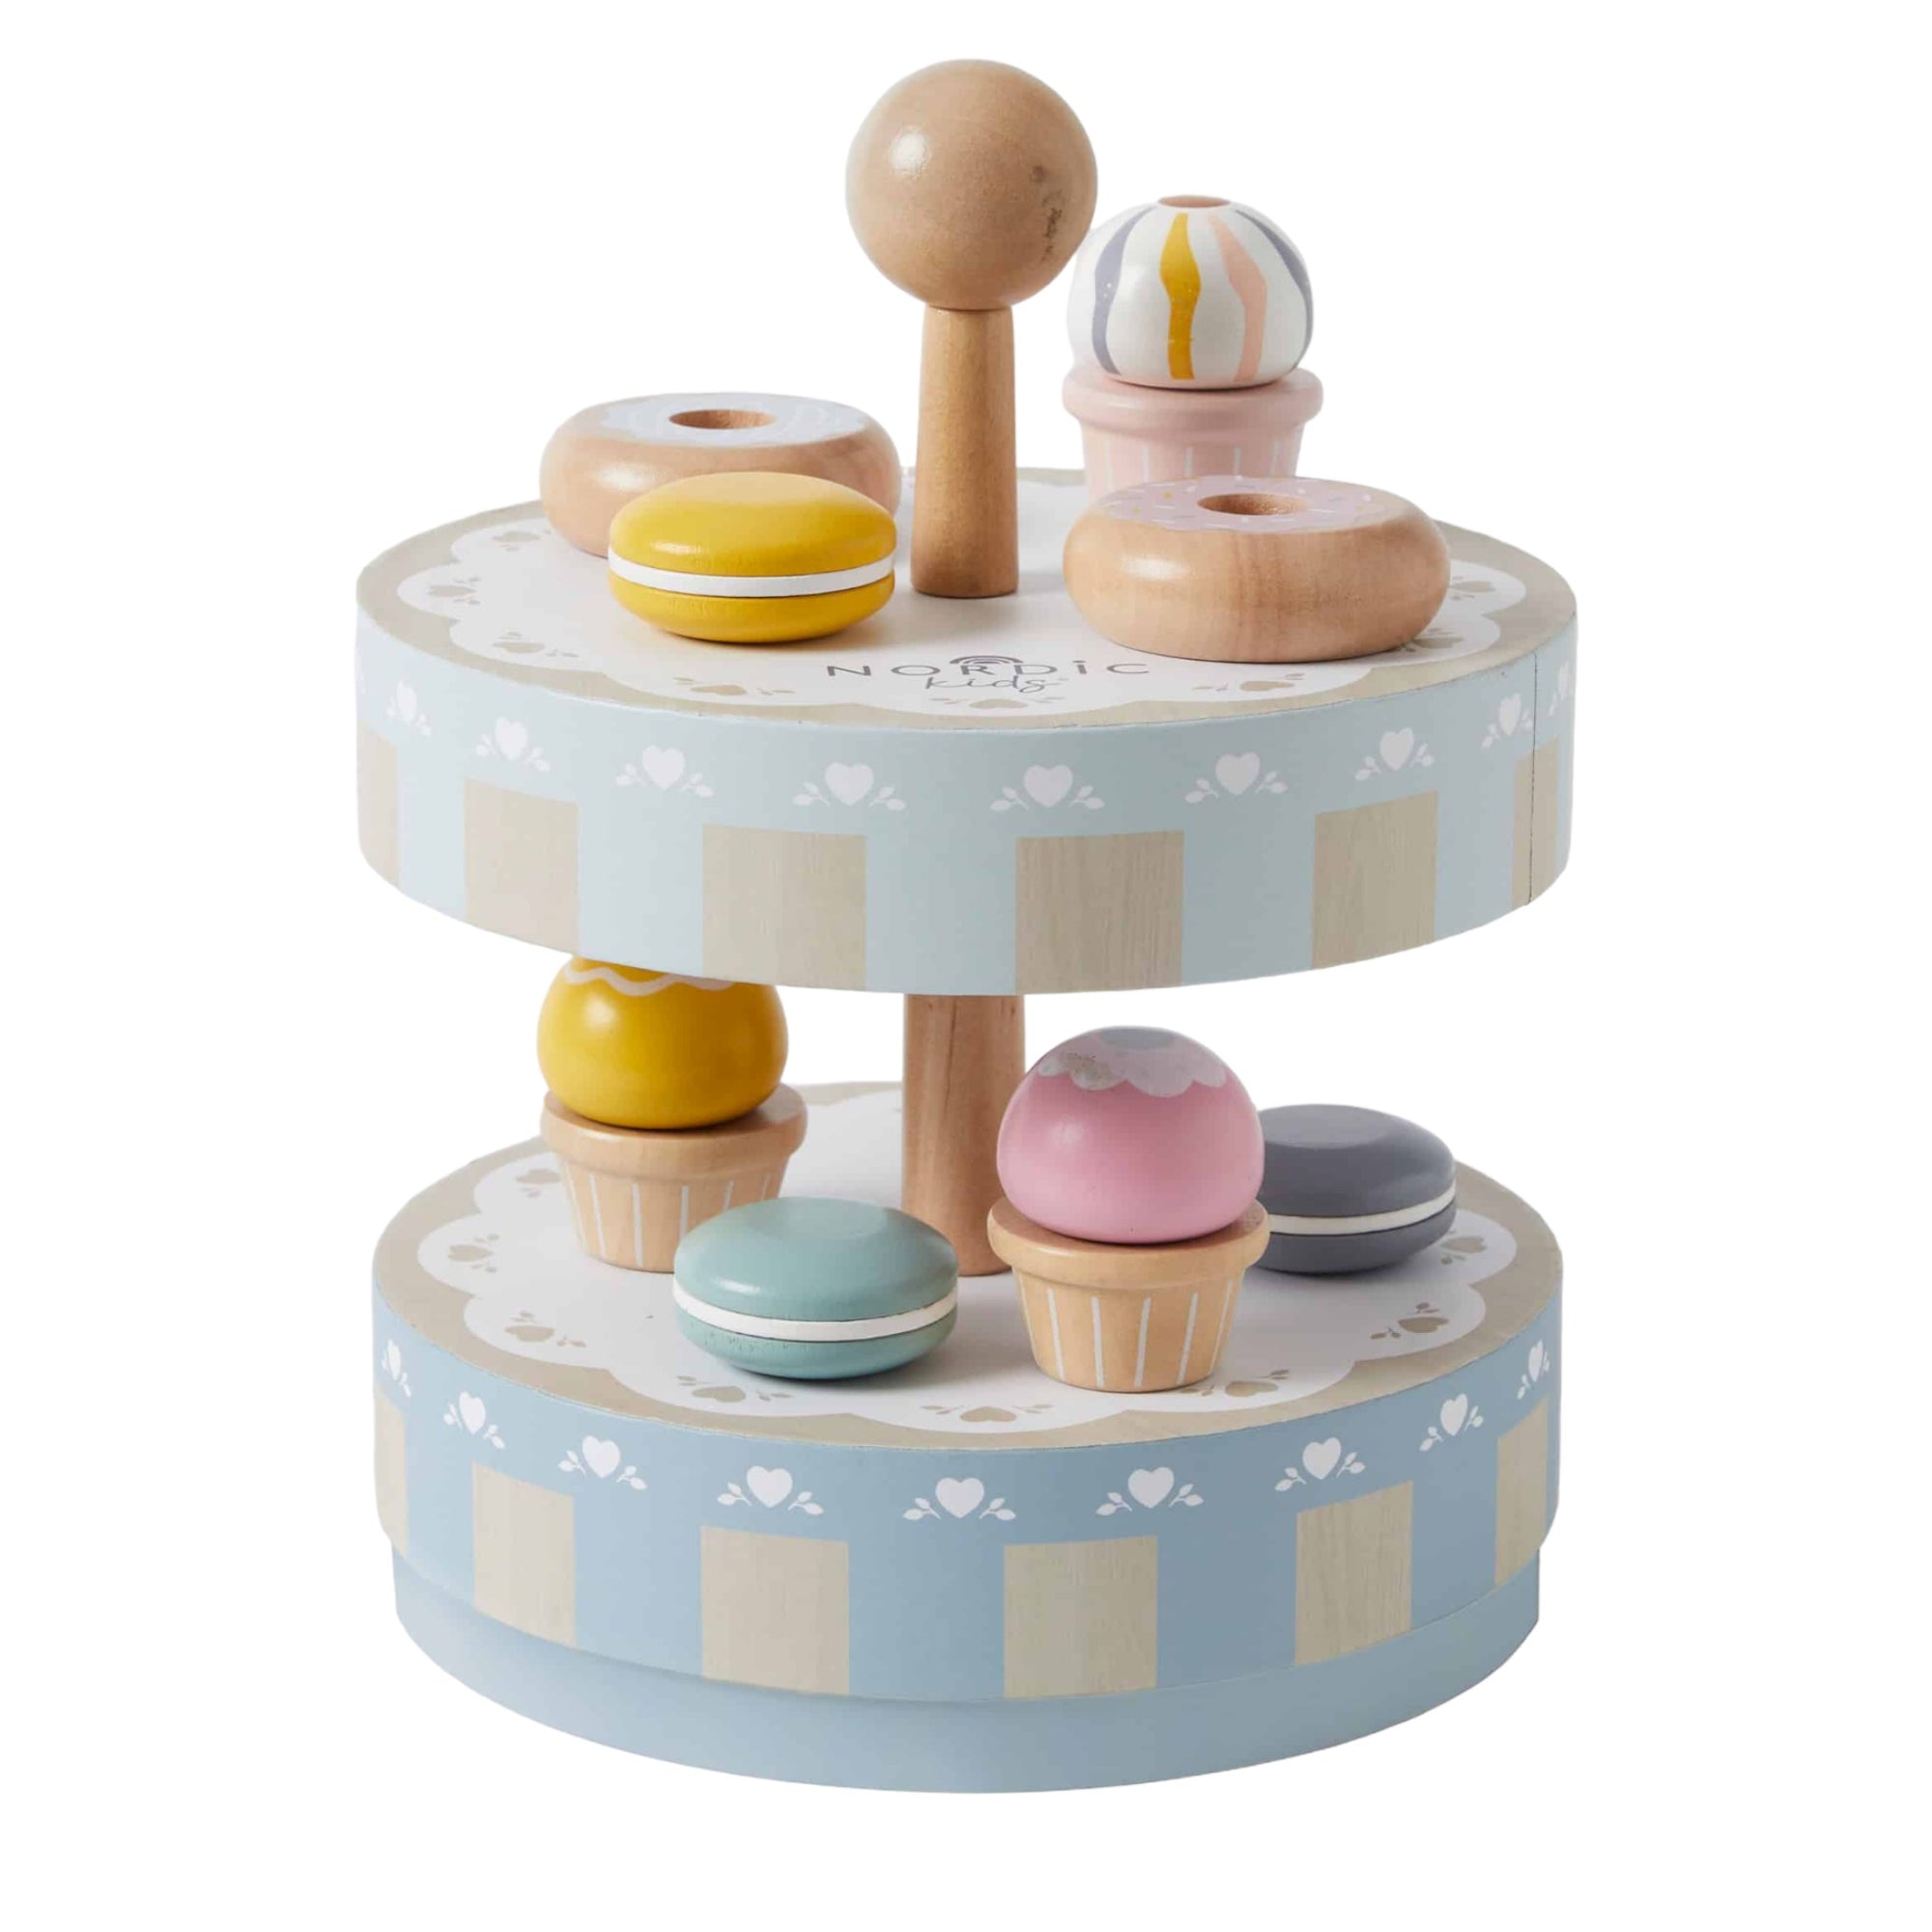 Nordic Kids | Wooden Cake Stand Set